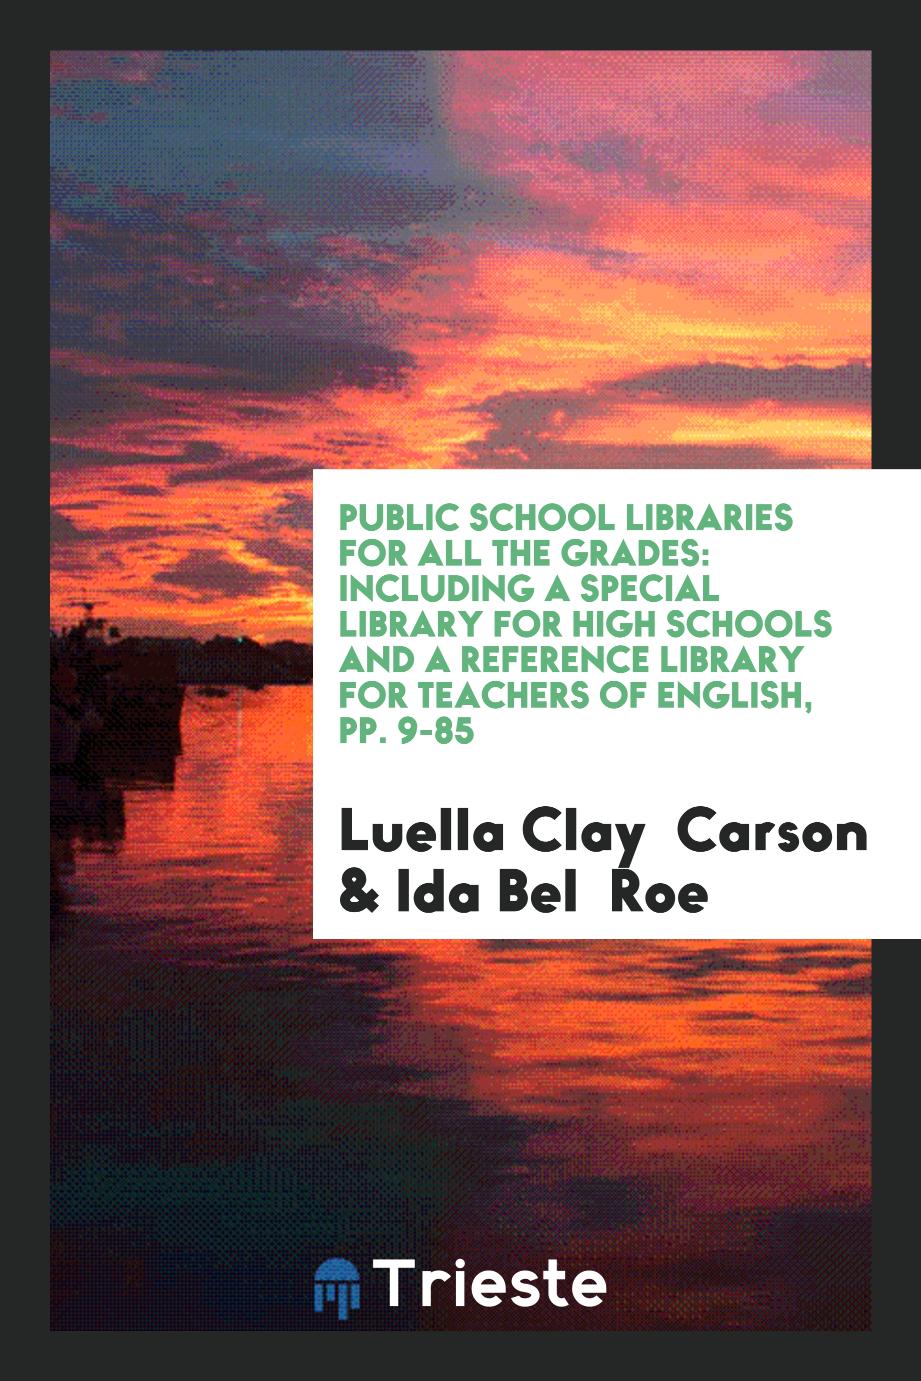 Public School Libraries for All the Grades: Including a Special Library for High Schools and a reference library for teachers of english, pp. 9-85